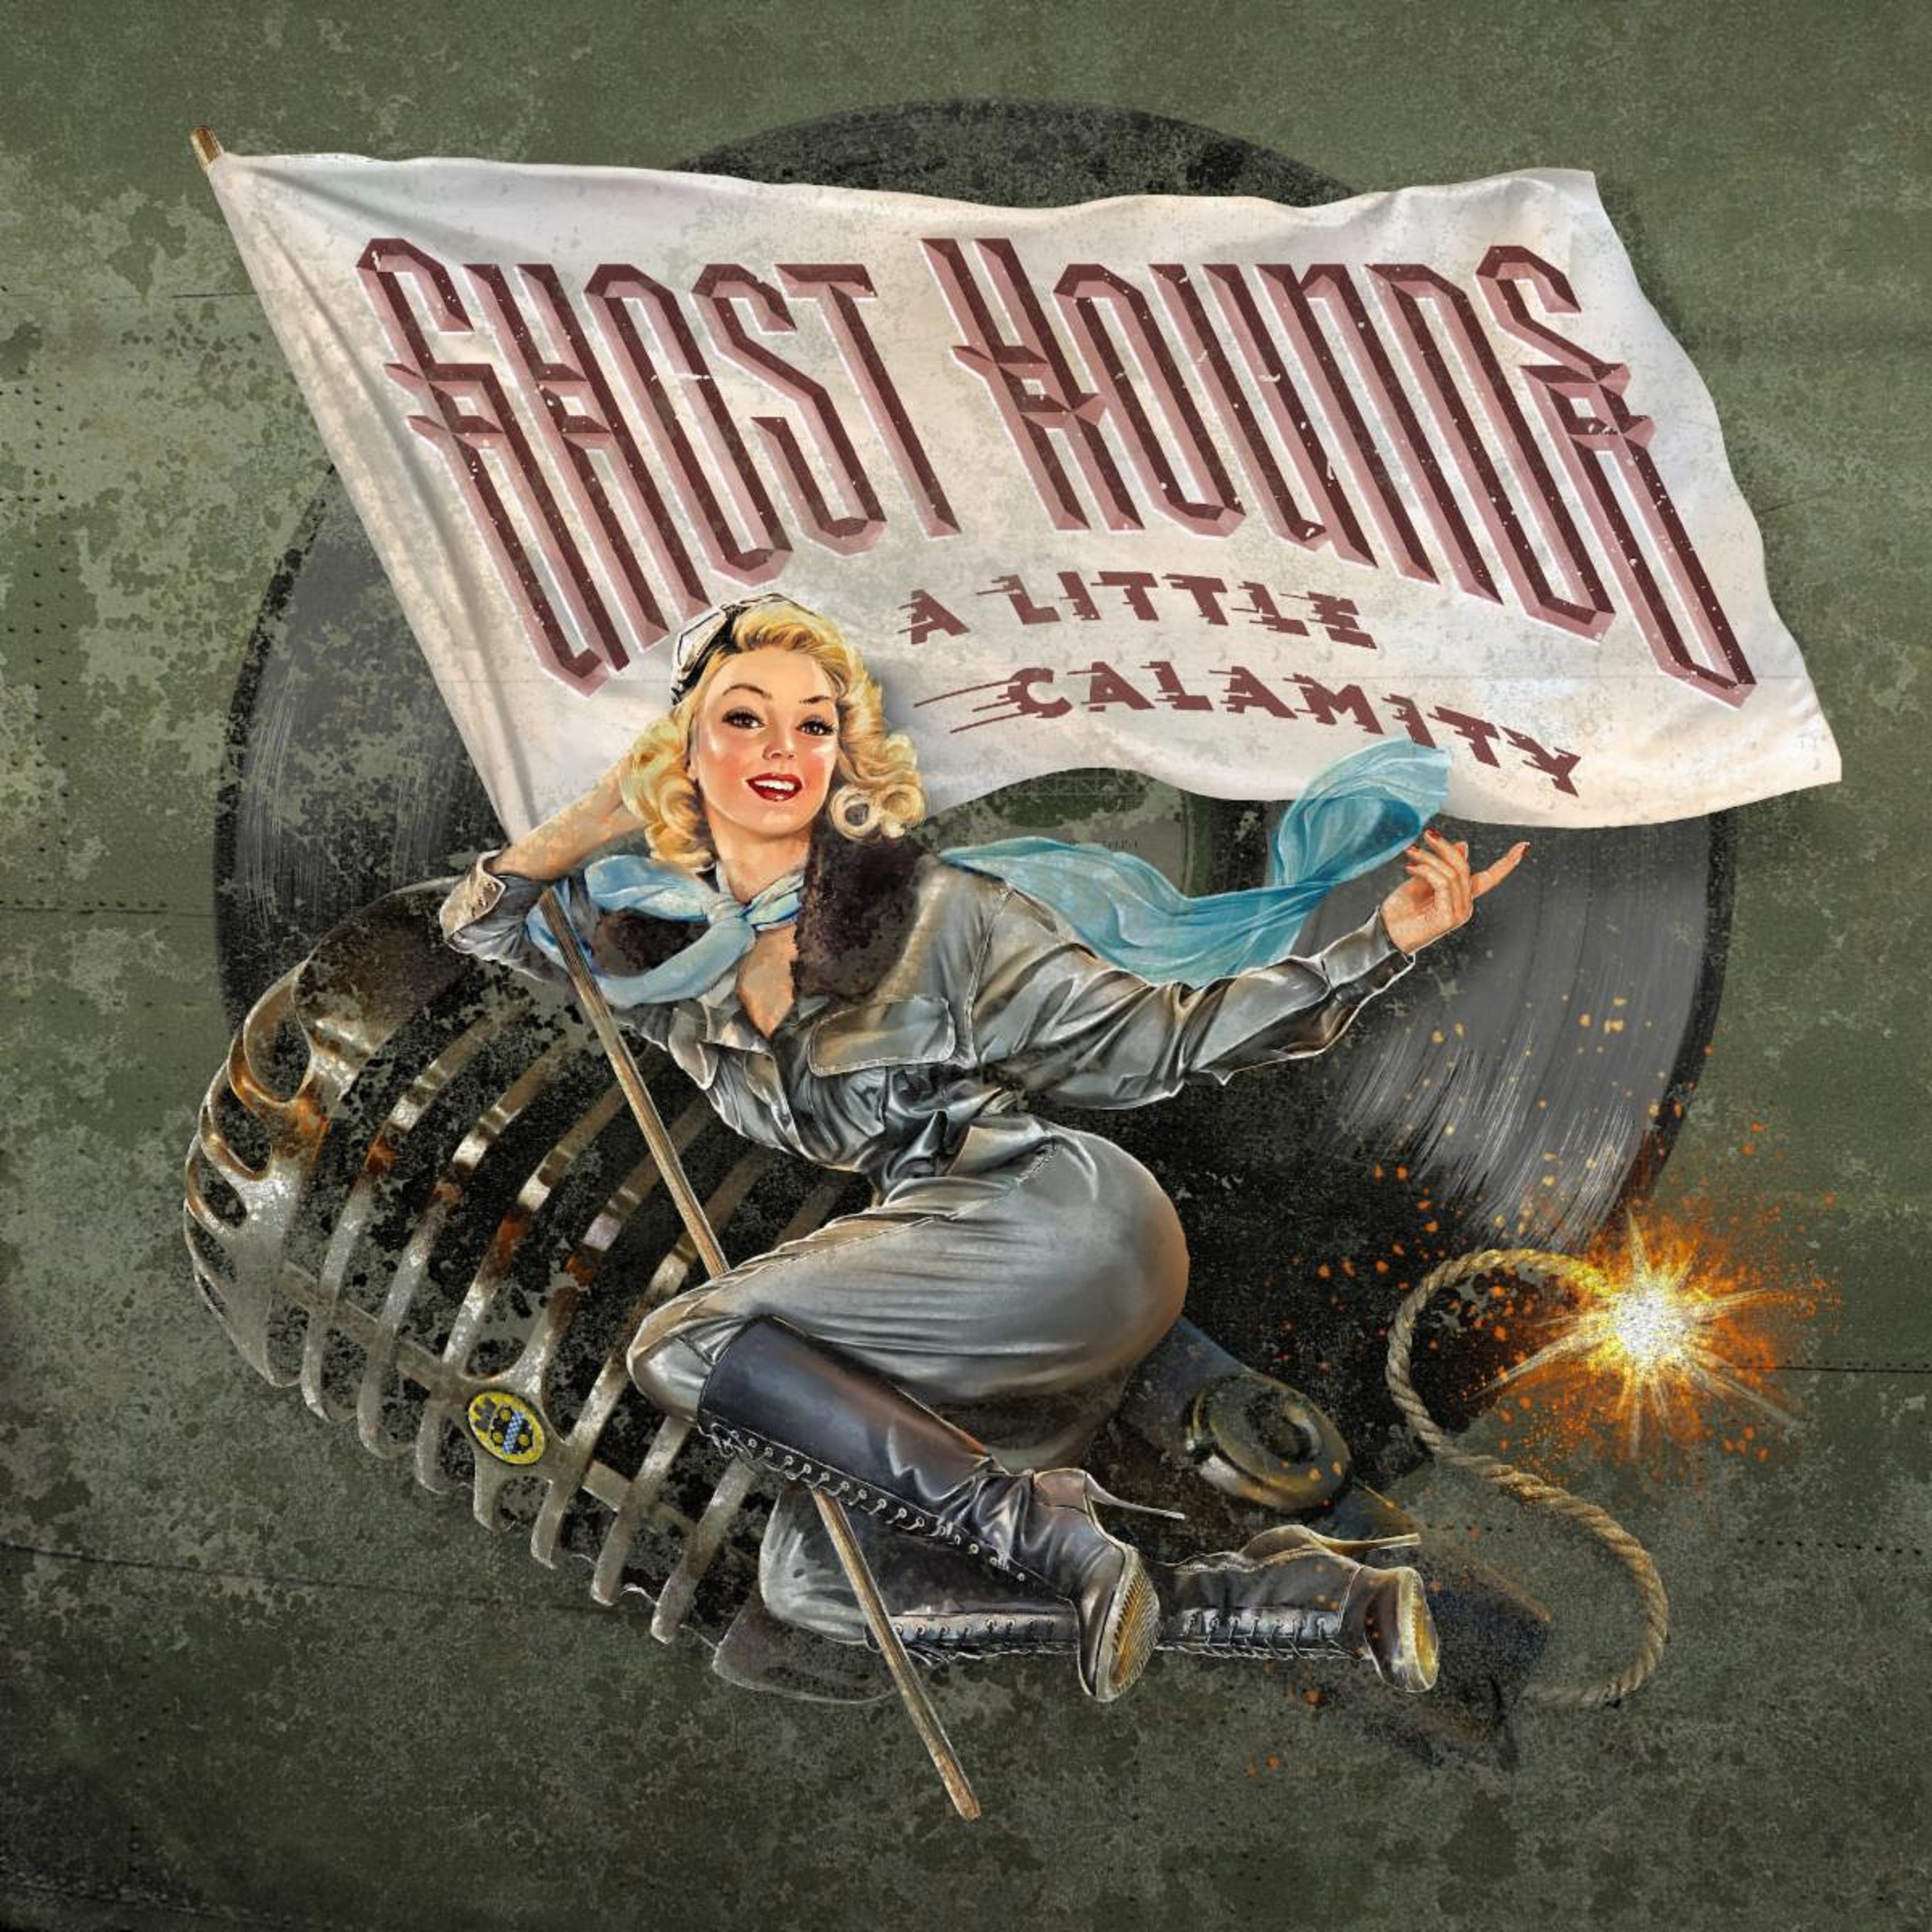 Ghost Hounds Release Sophomore Album, 'A Little Calamity'